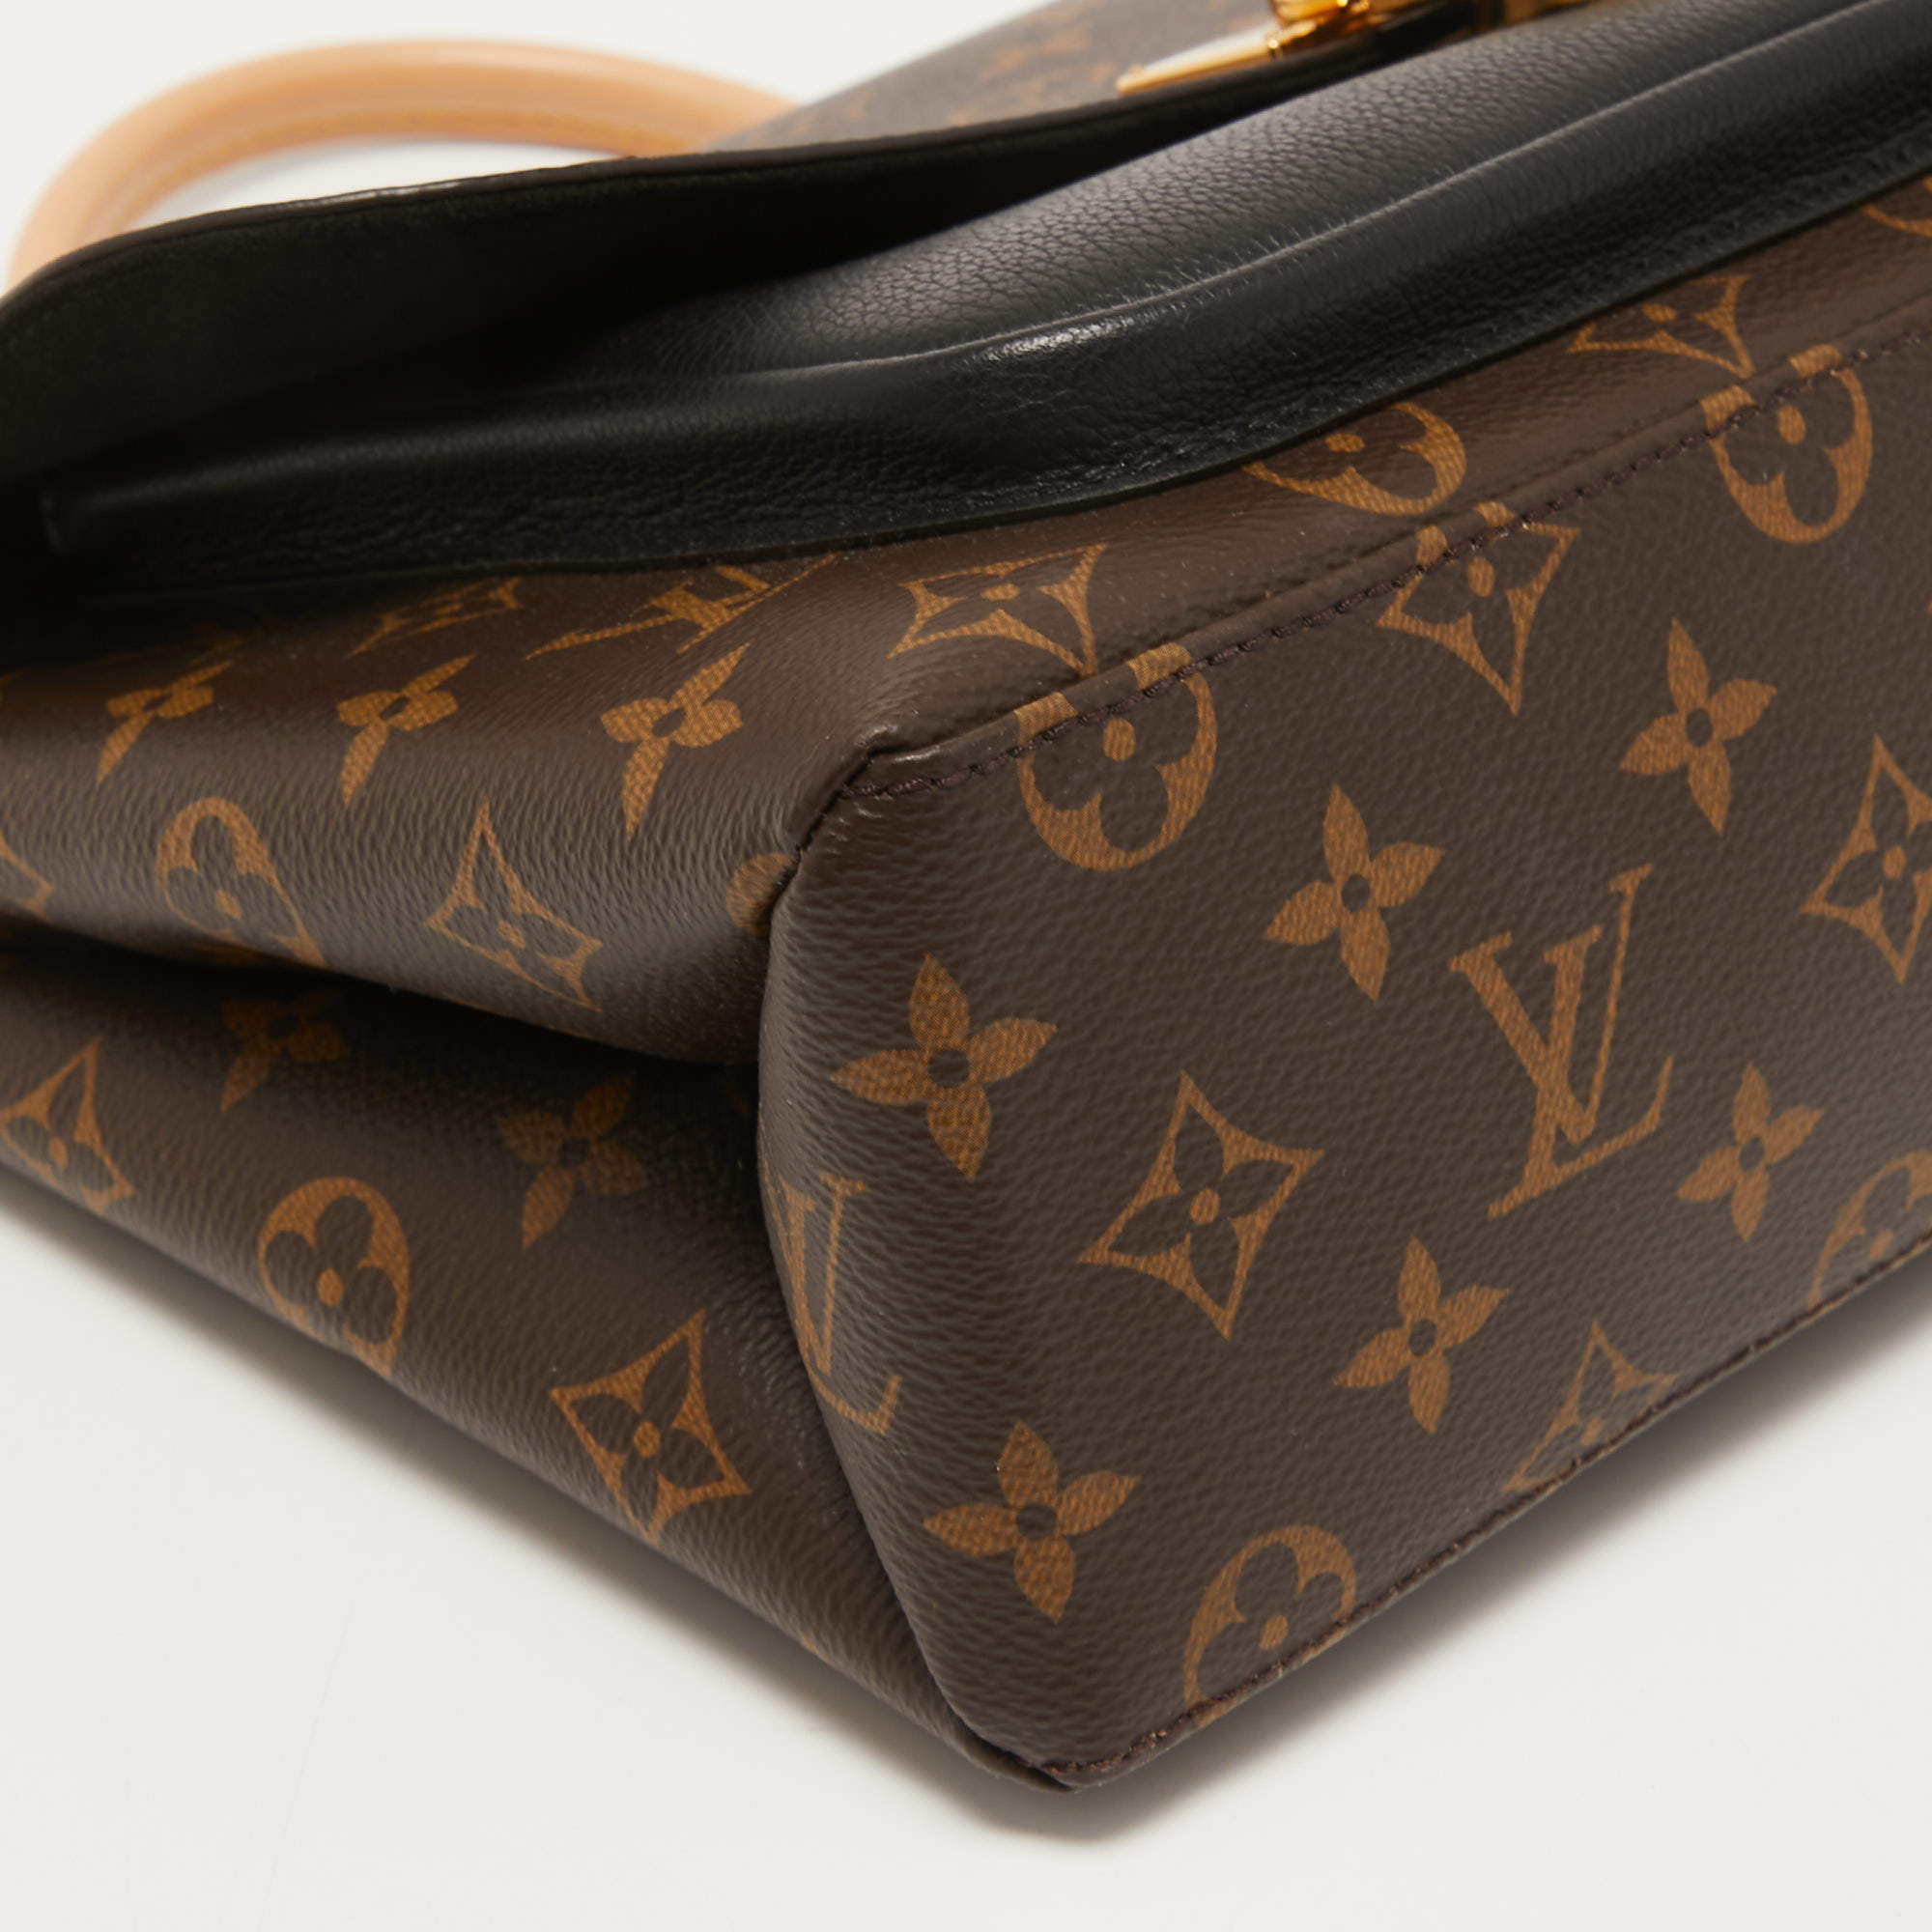 Louis Vuitton Marignan Monogram Canvas Bag 👢👑 Product Code : 287^ Please  contact me for your orders and questions via Whatsapp(+905060246175, +44  7561389919) …